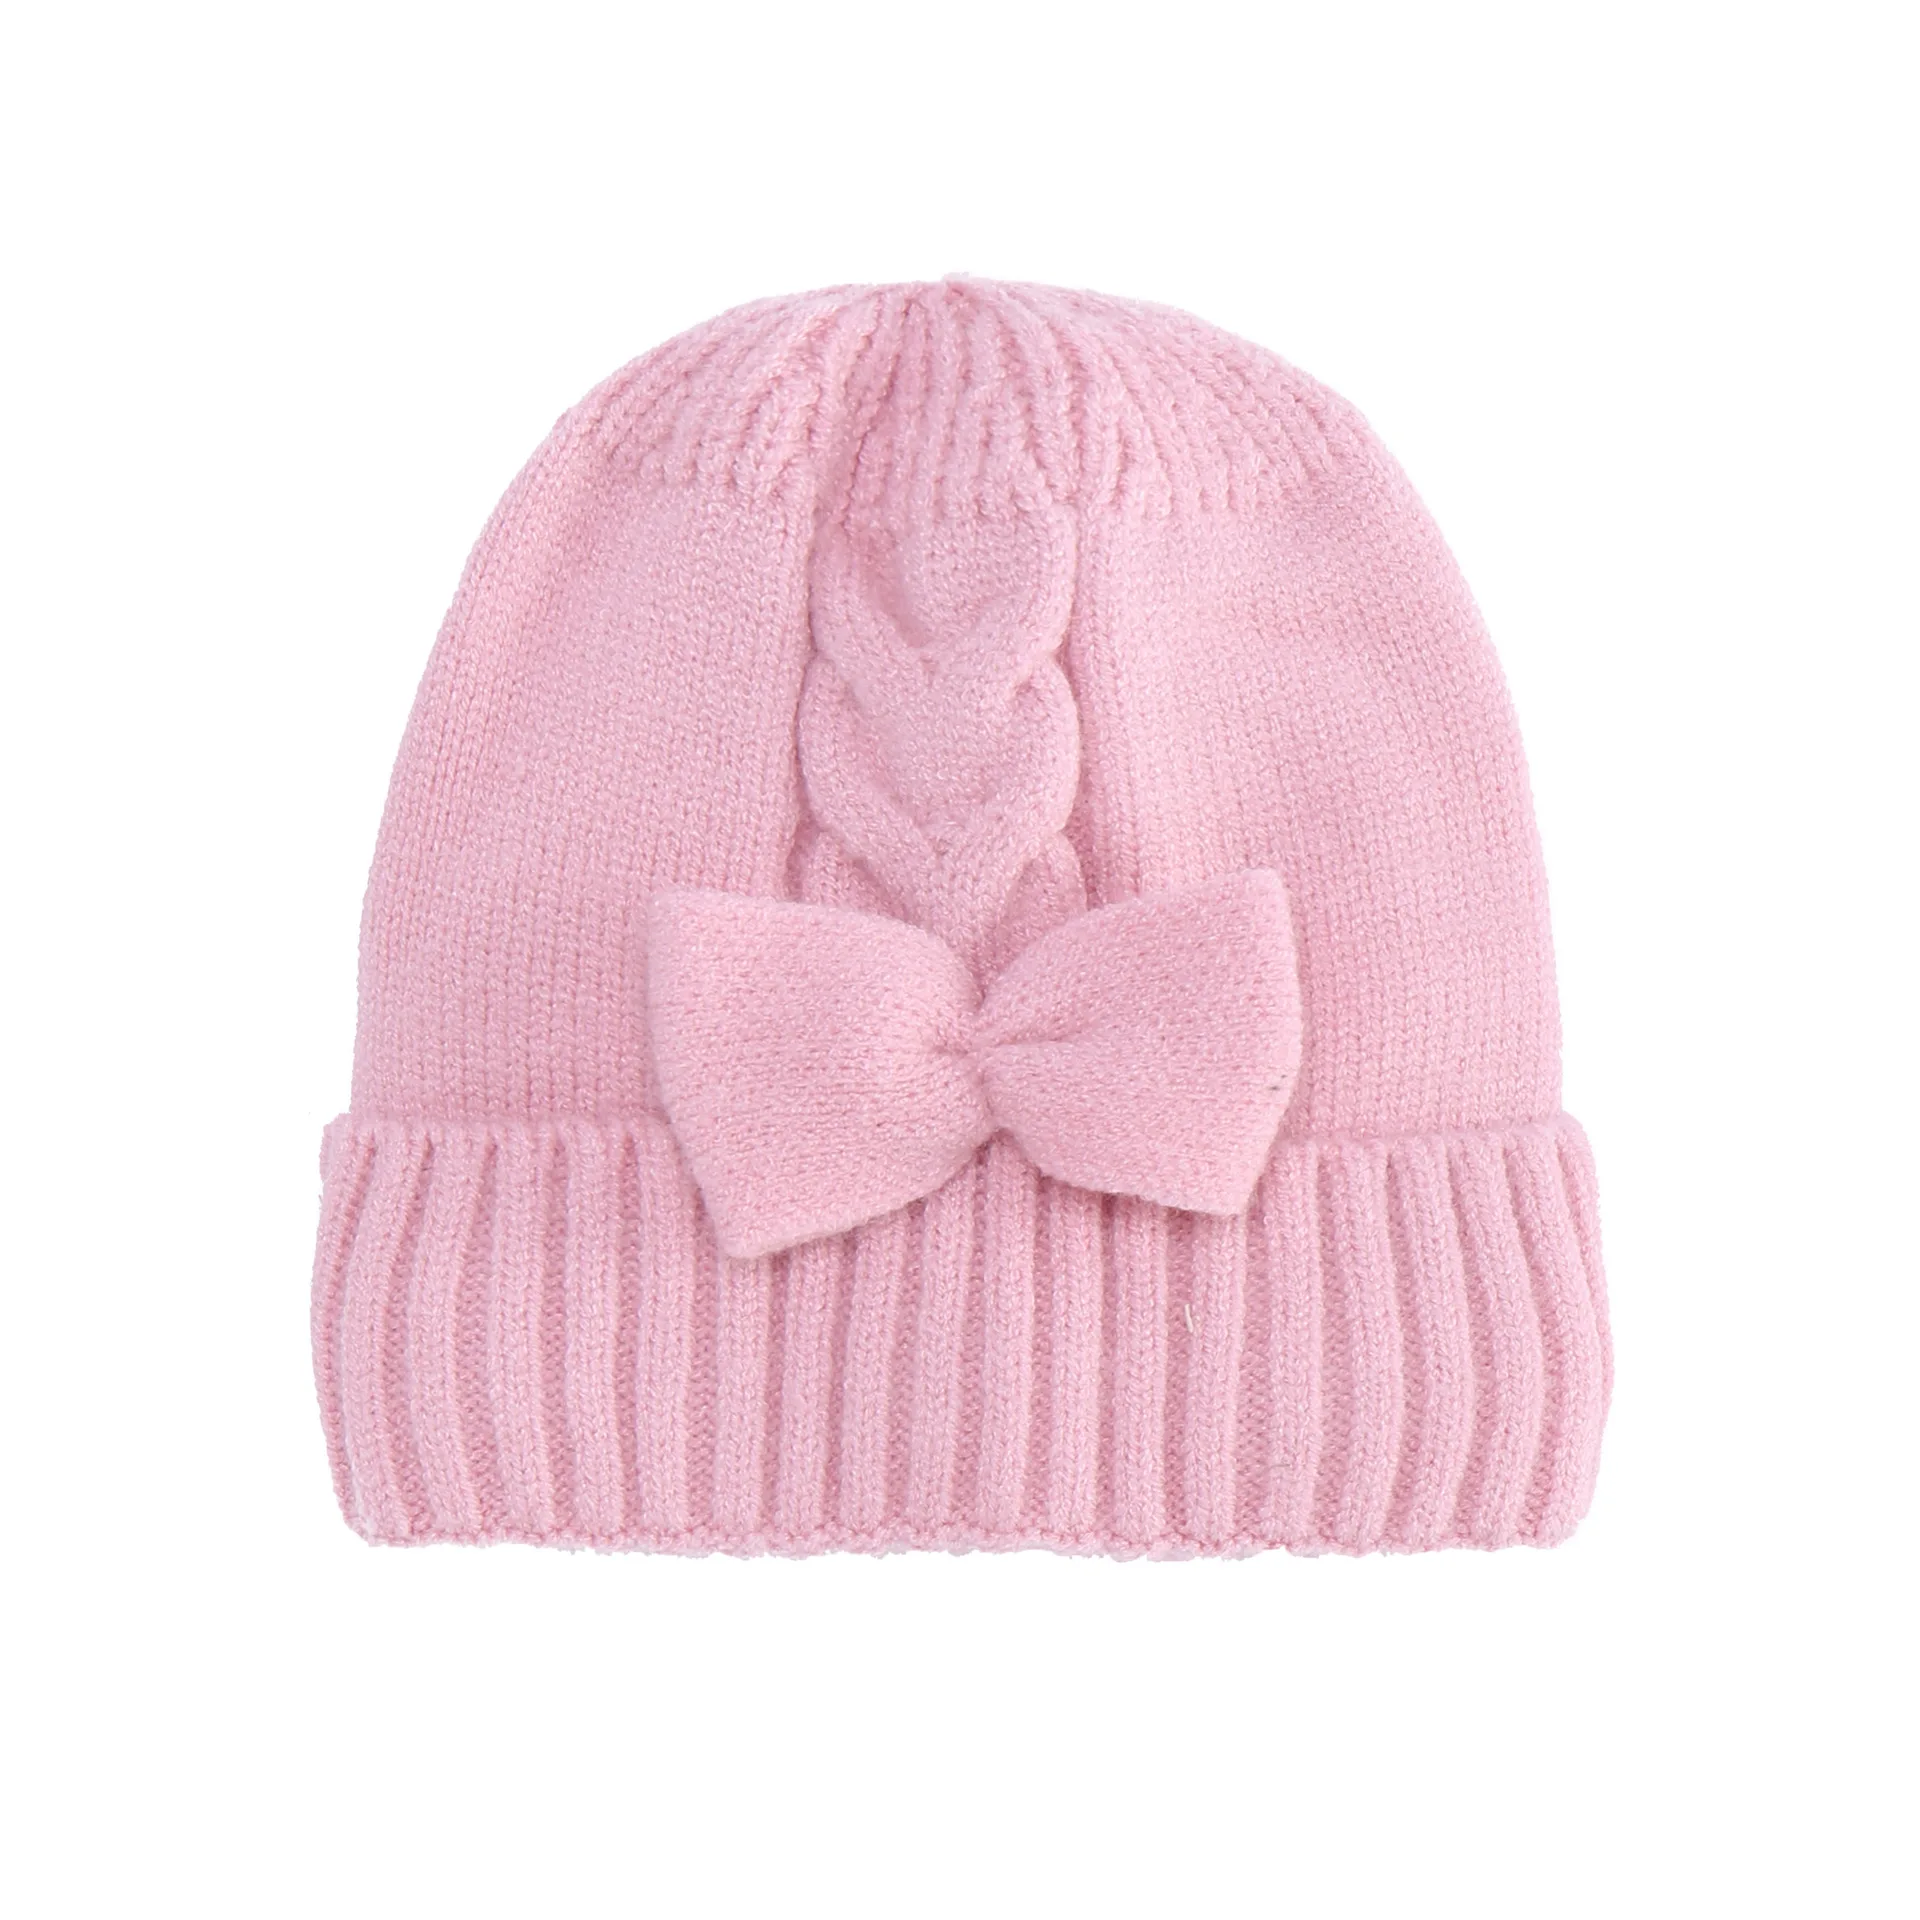 Newest Coming Winter Solid Color Knitted Bow Hat Suit For Baby And Children